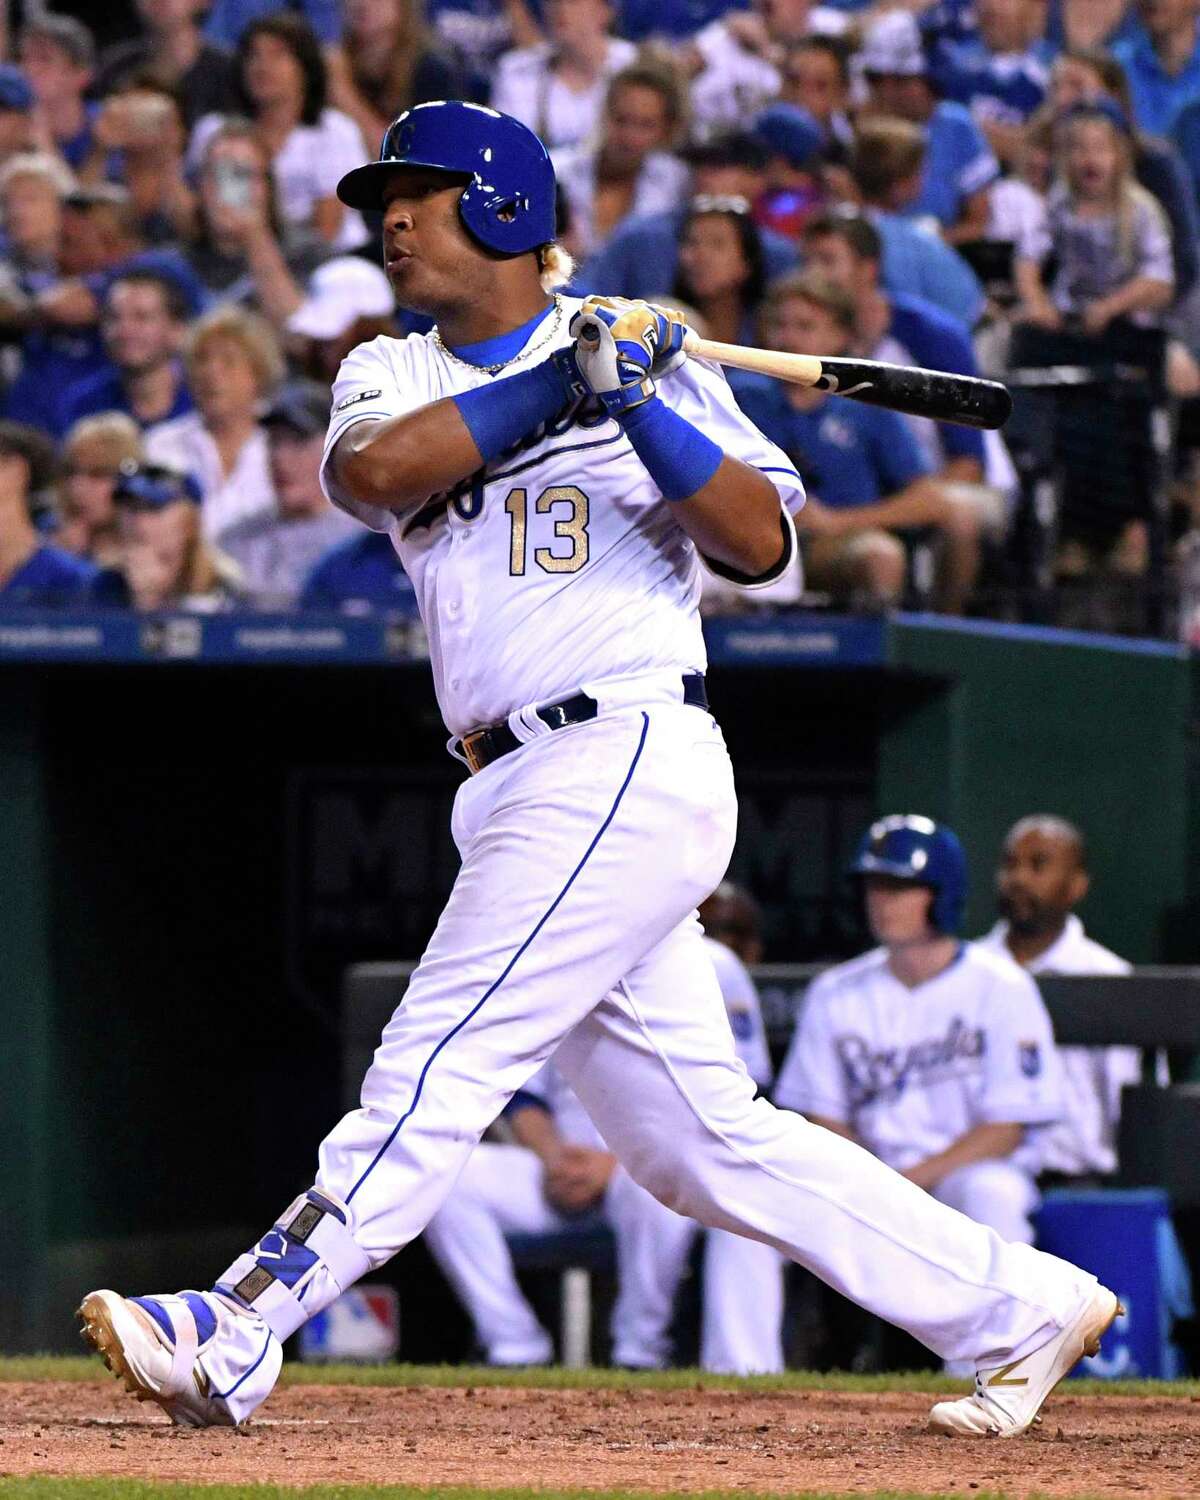 KANSAS CITY, MO -JUNE 23: Salvador Perez #13 of the Kansas City Royals hits a RBI single in the seventh inning against the Toronto Blue Jays at Kauffman Stadium on June 23, 2017 in Kansas City, Missouri. (Photo by Ed Zurga/Getty Images) ORG XMIT: 700011354